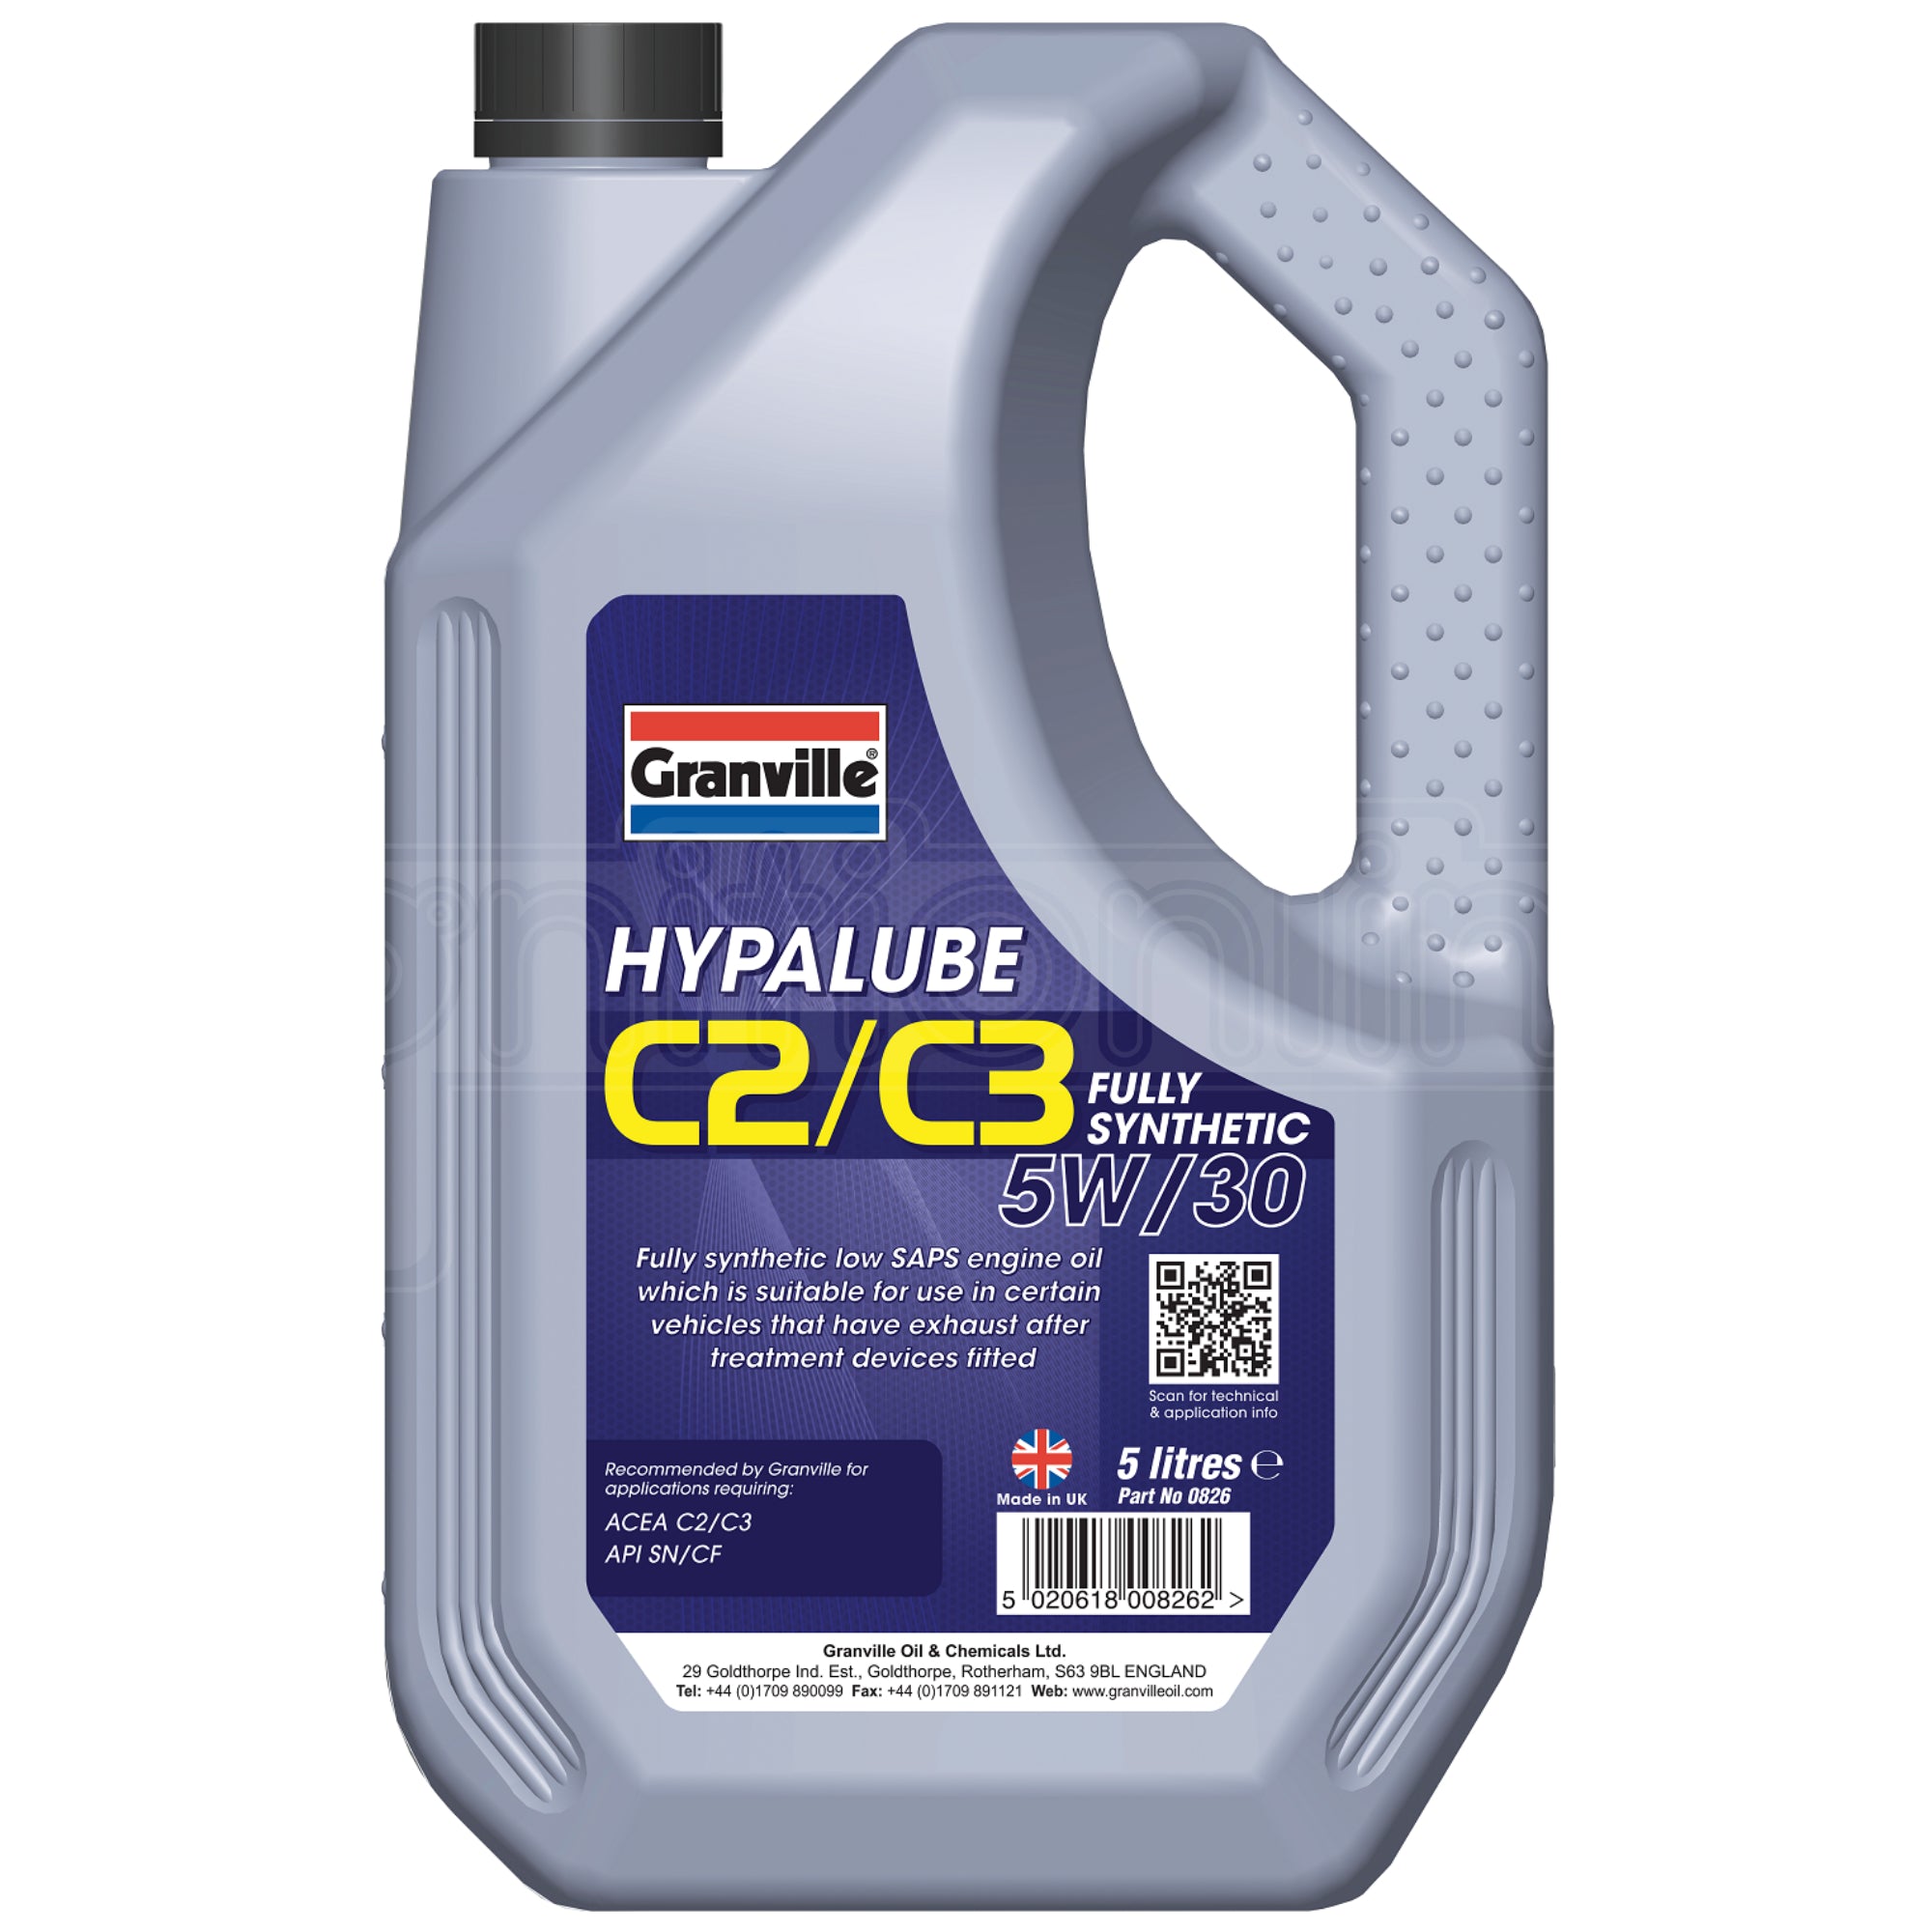 Granville Hypalube C2/C3 Fully Synthetic 5W/30 5 Litres